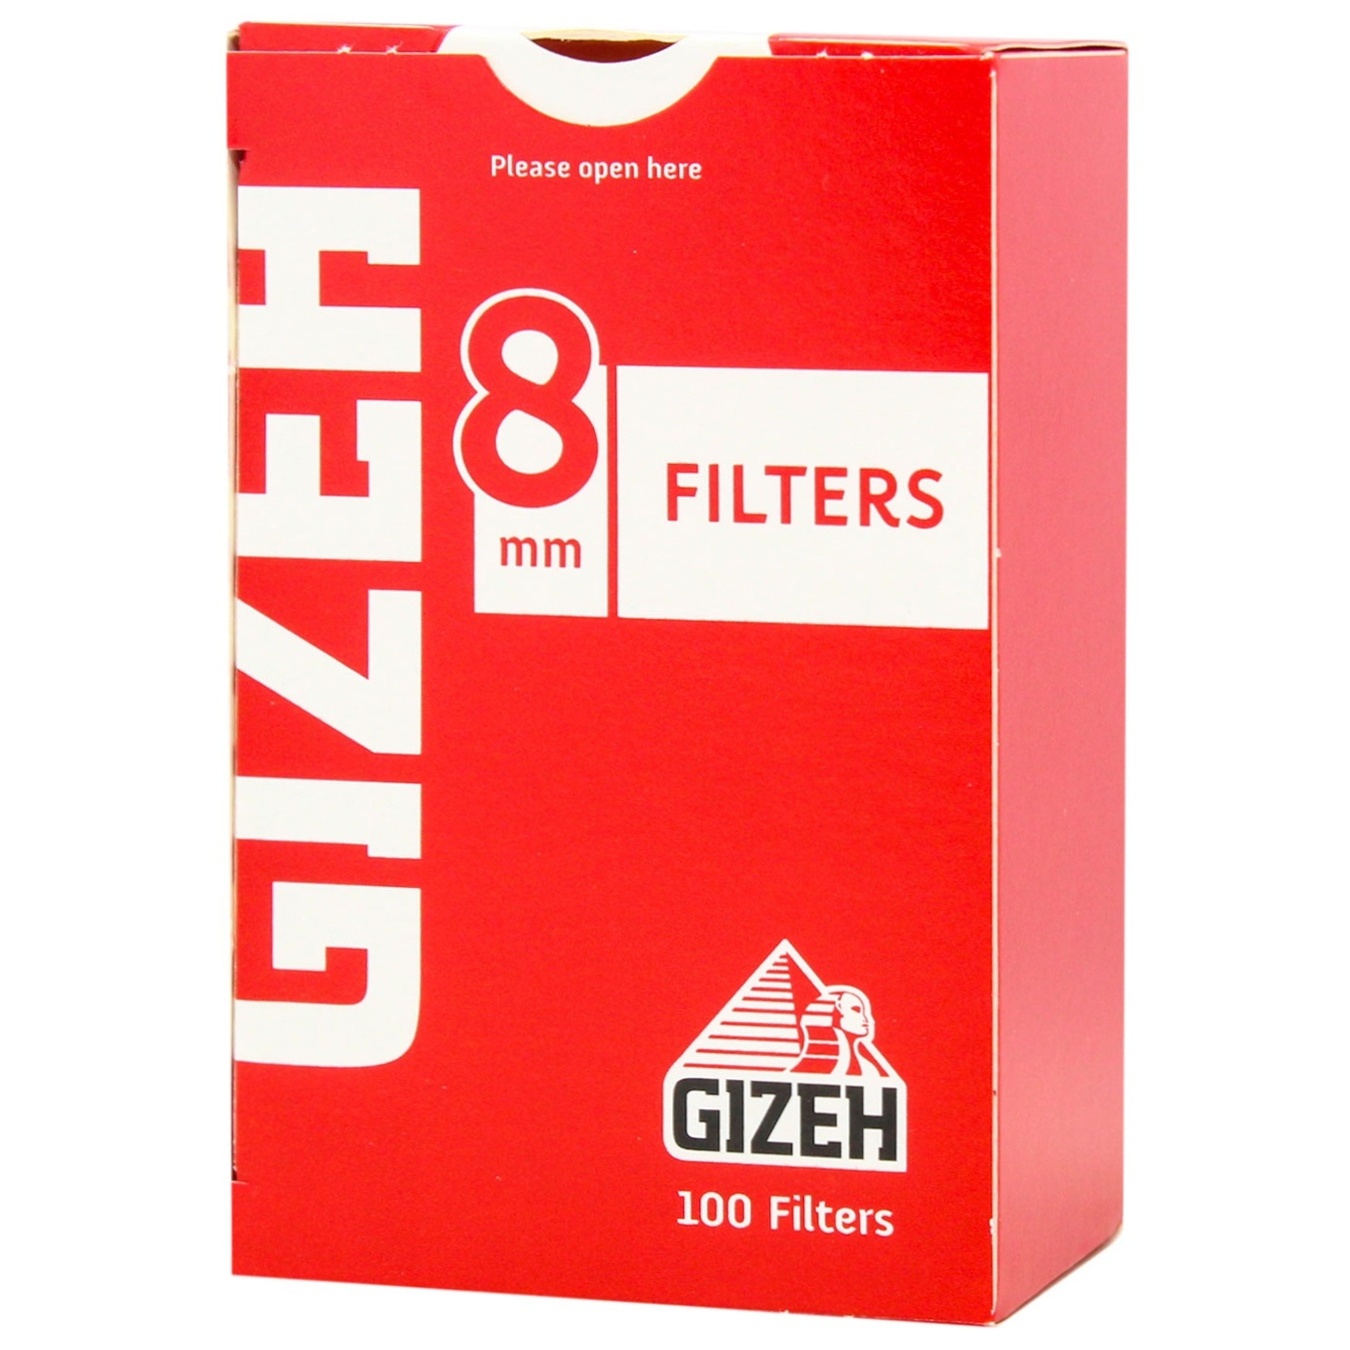 Gizeh filter for self-winding paper 100pcs